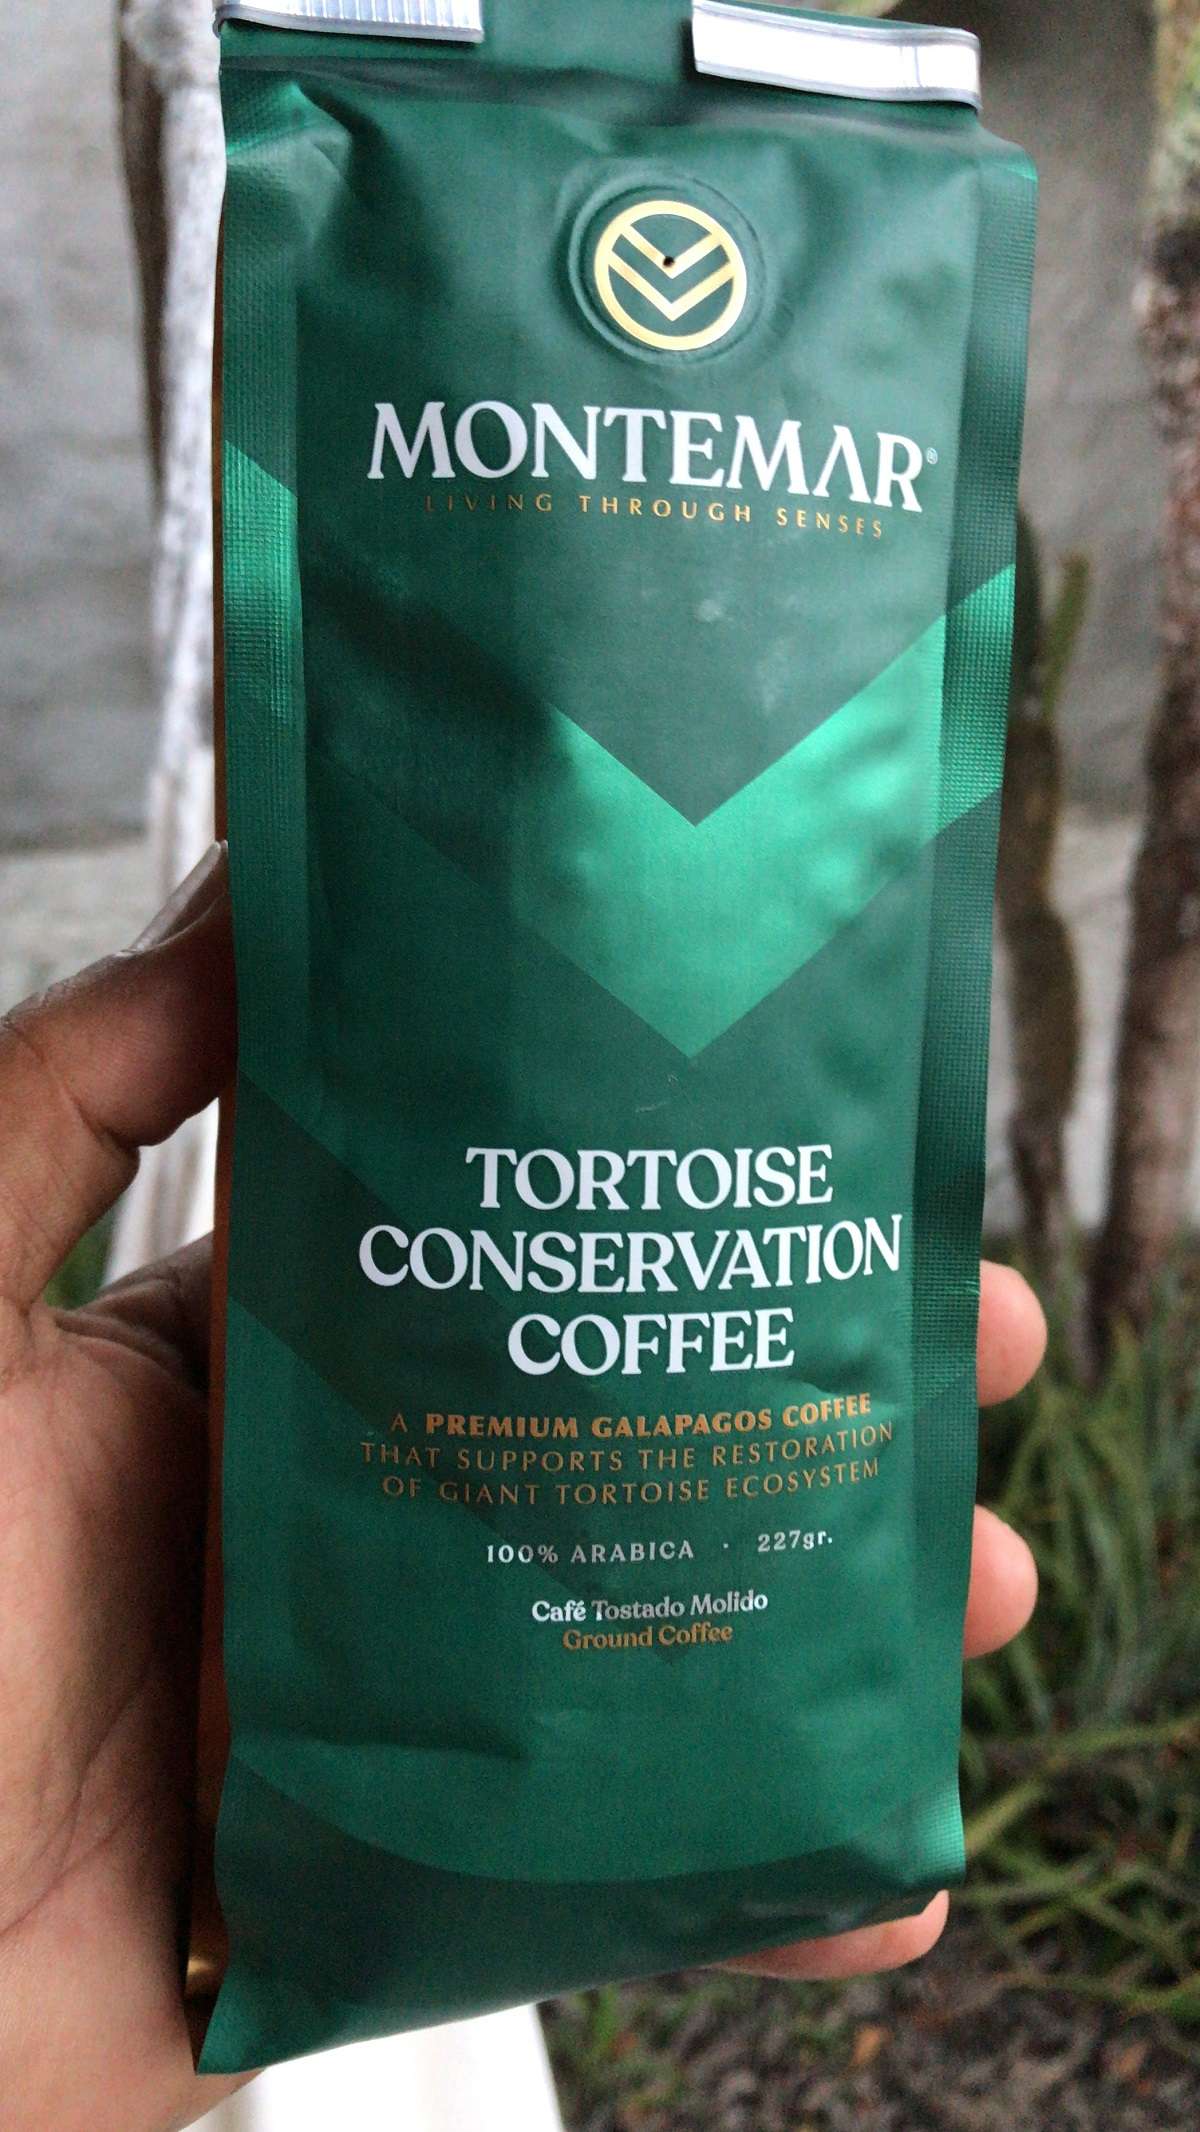 Tortoise Conservation Coffee in the Galapagos